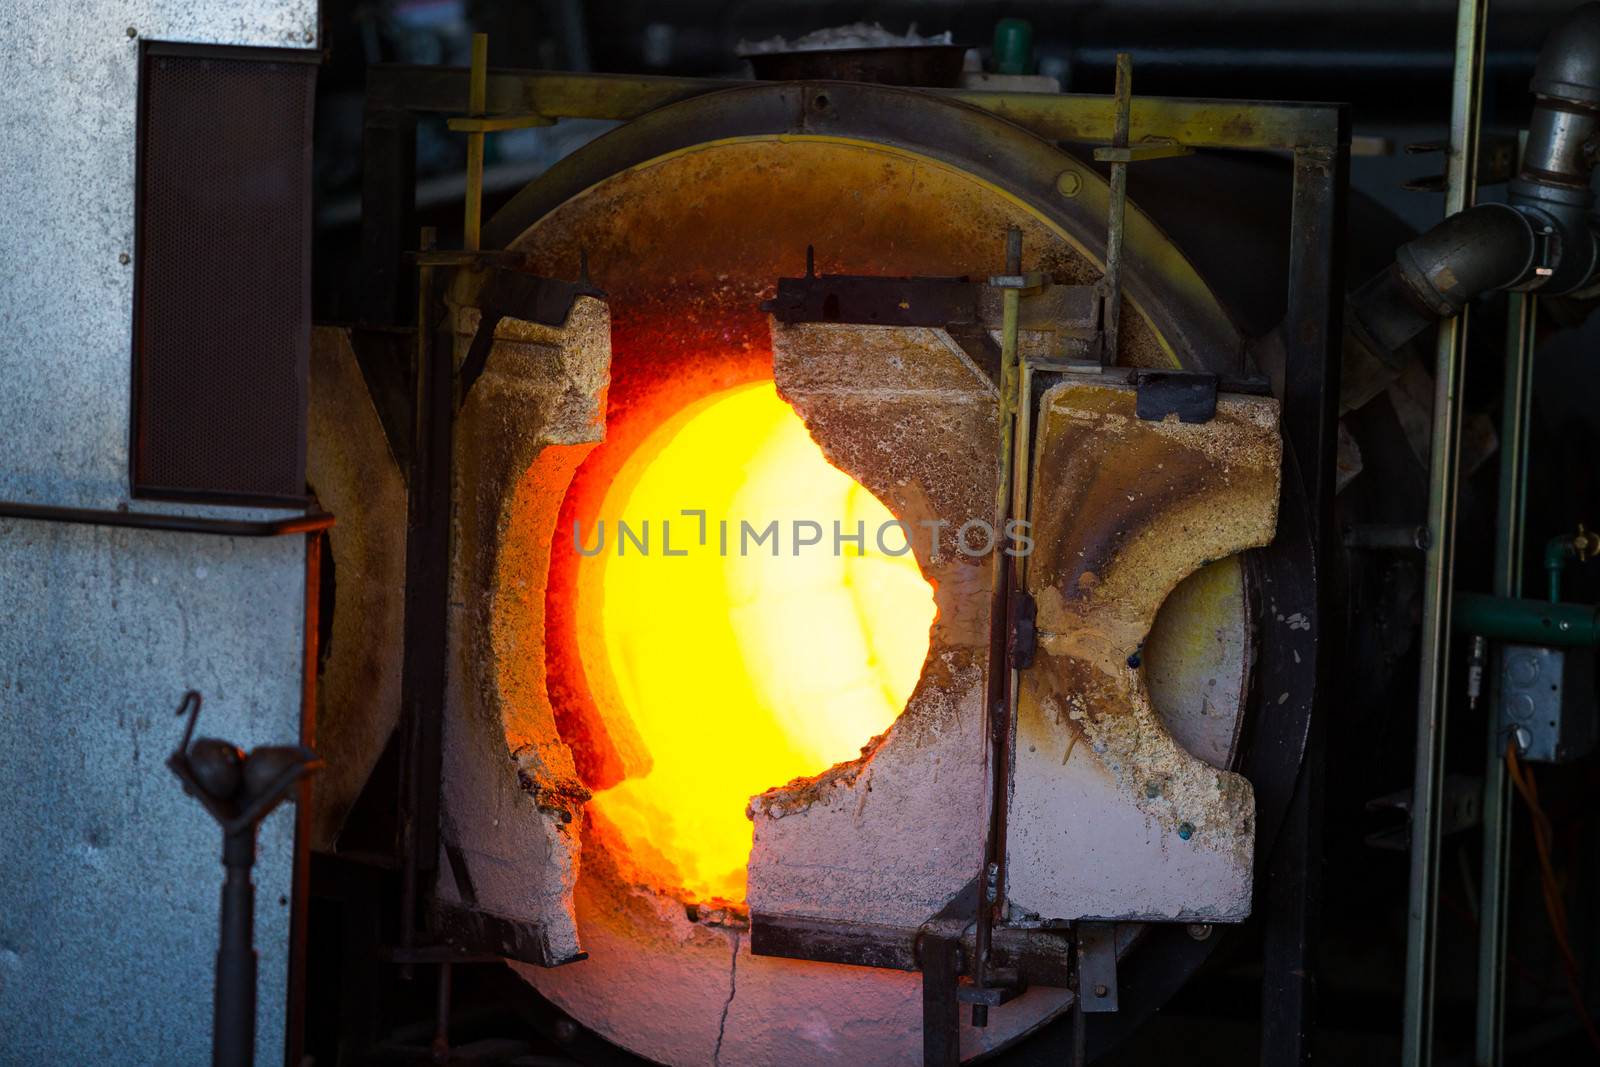 Glassblowing Furnace by joshuaraineyphotography